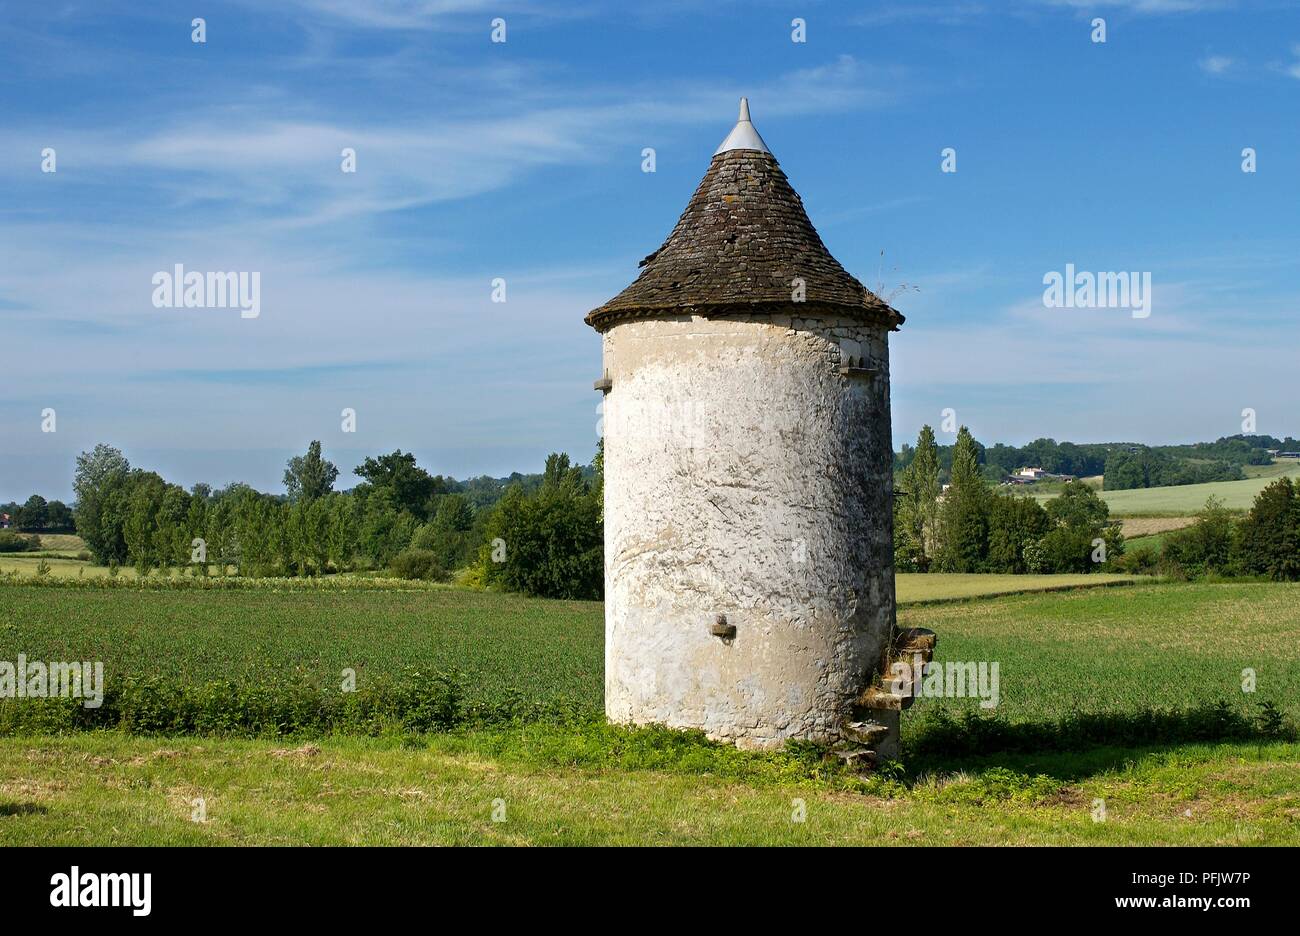 France, Aquitaine, Lot-et-Garonne, Pays du Dropt, traditional stone dovecote, in a field Stock Photo